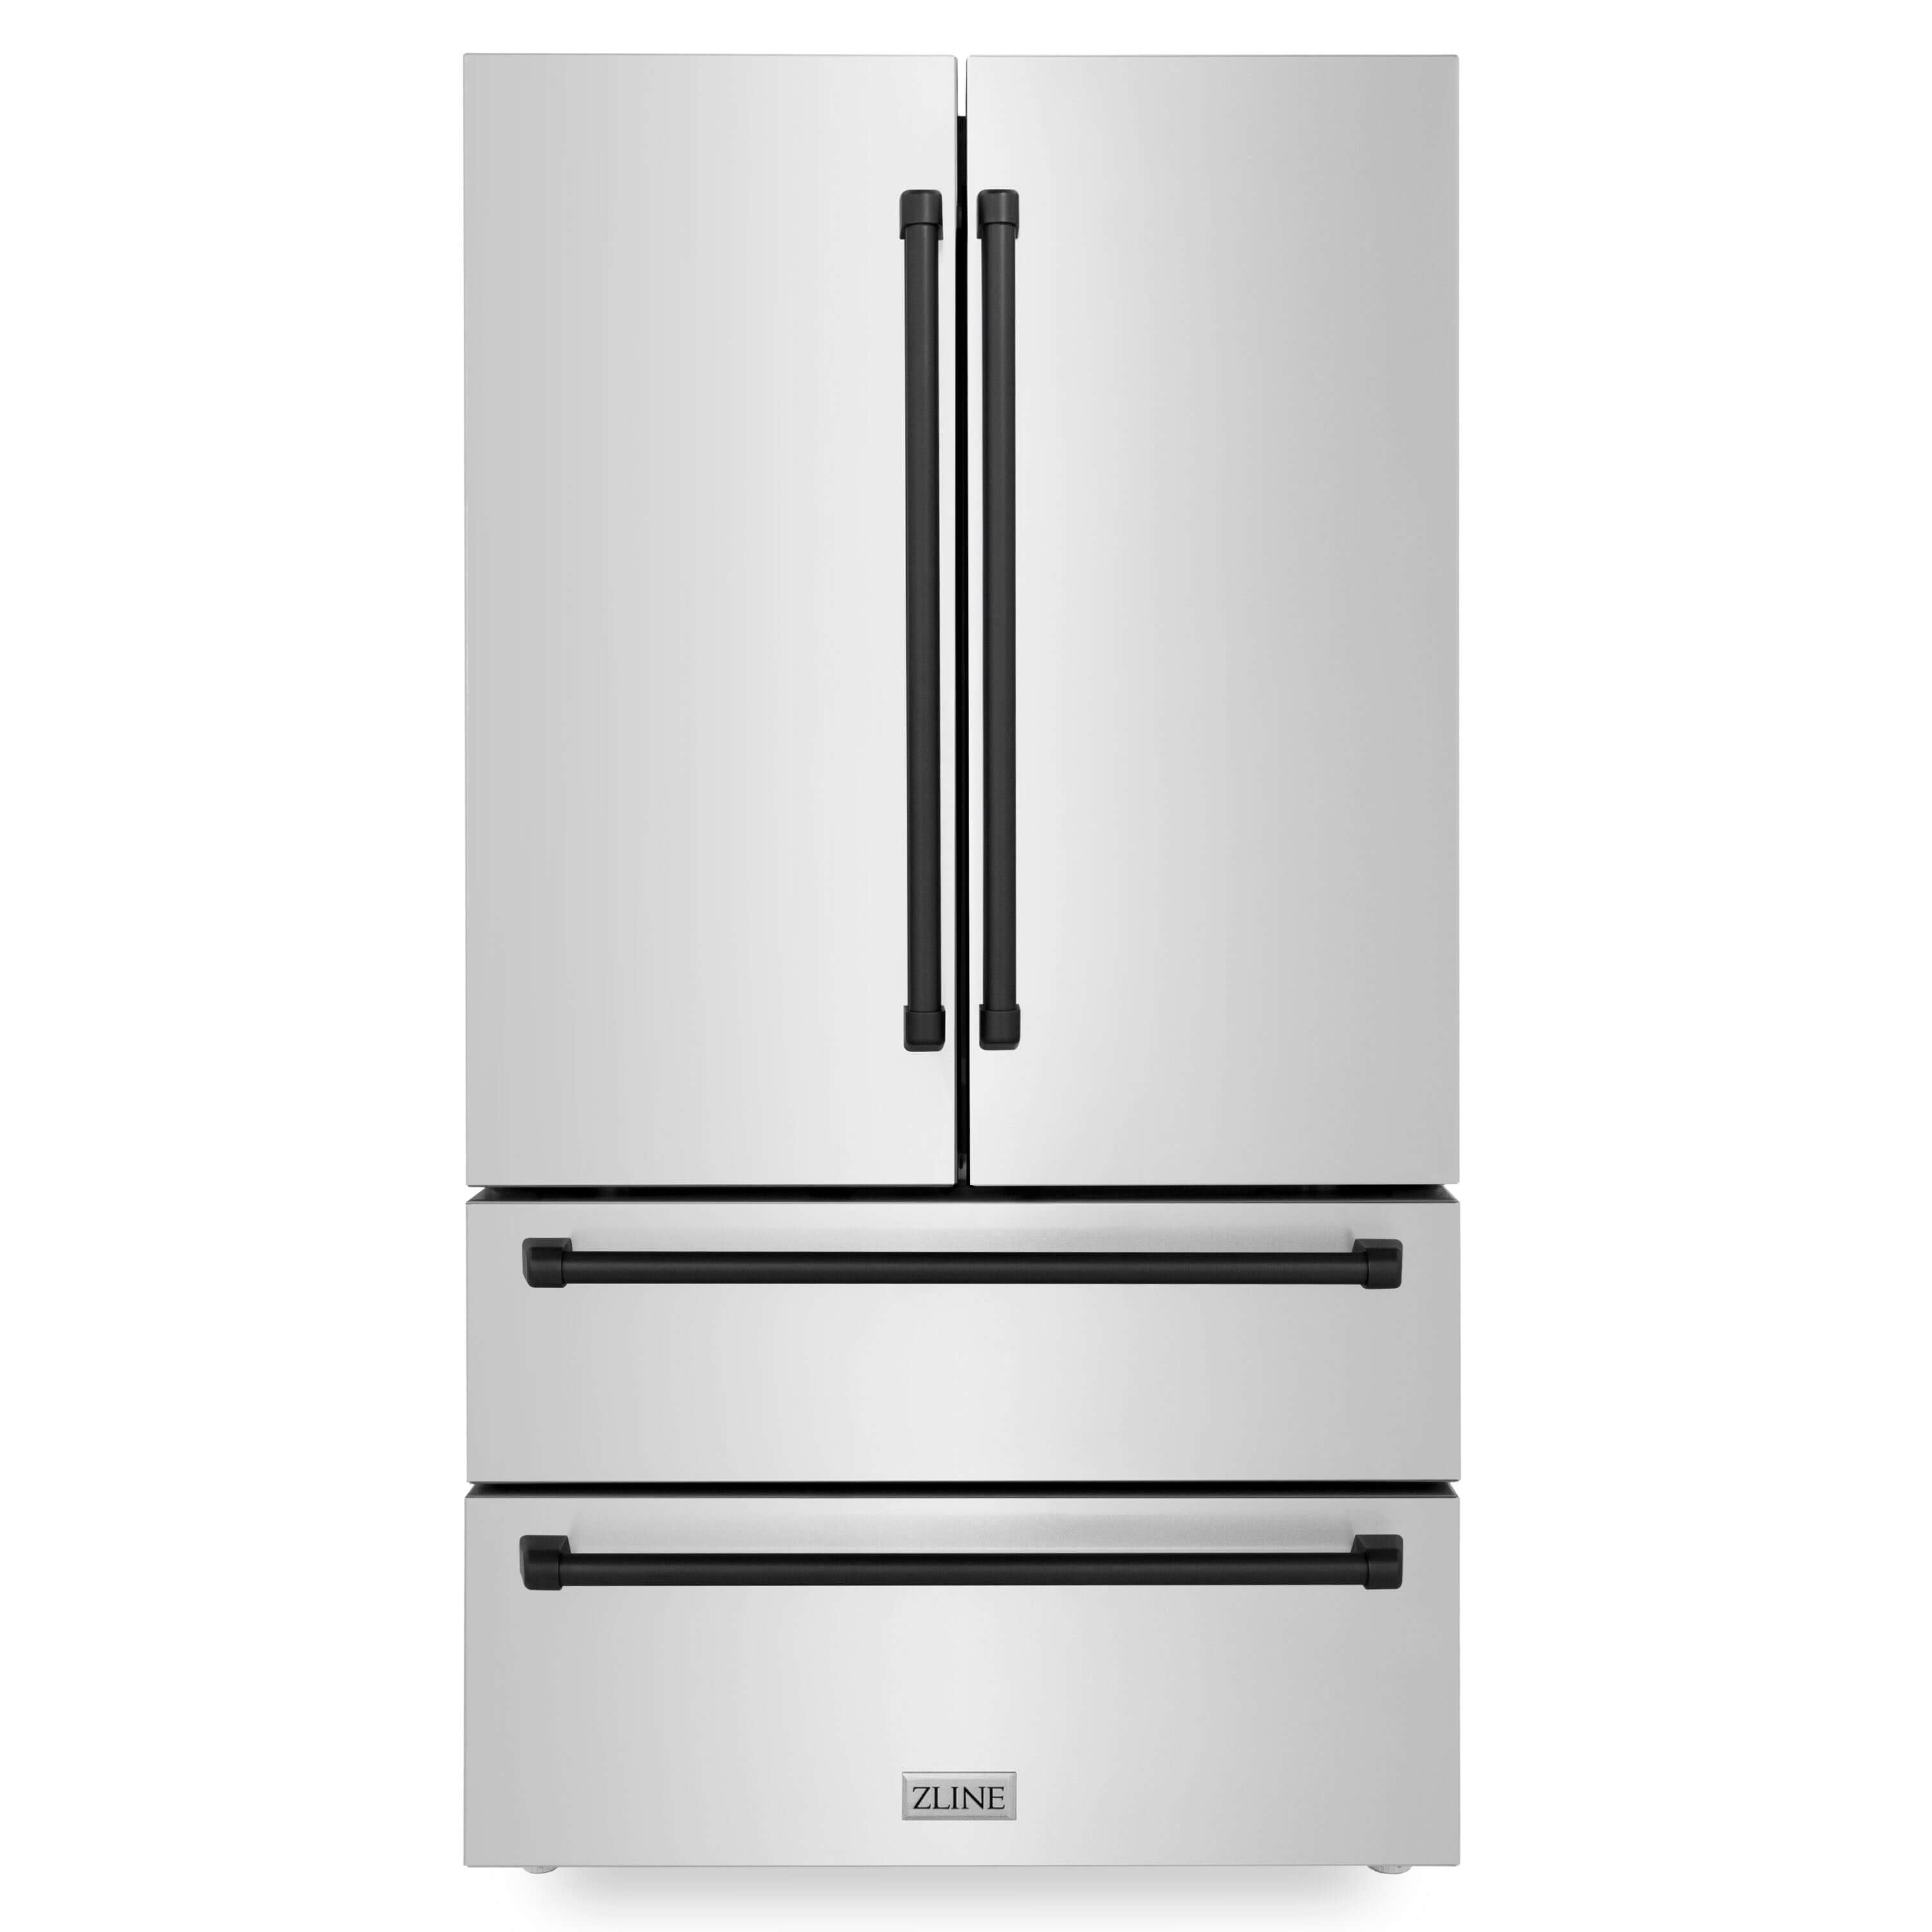 ZLINE 36 in. Autograph Edition 22.5 cu. ft Freestanding French Door Refrigerator with Ice Maker in Fingerprint Resistant Stainless Steel with Matte Black Accents (RFMZ-36-MB)